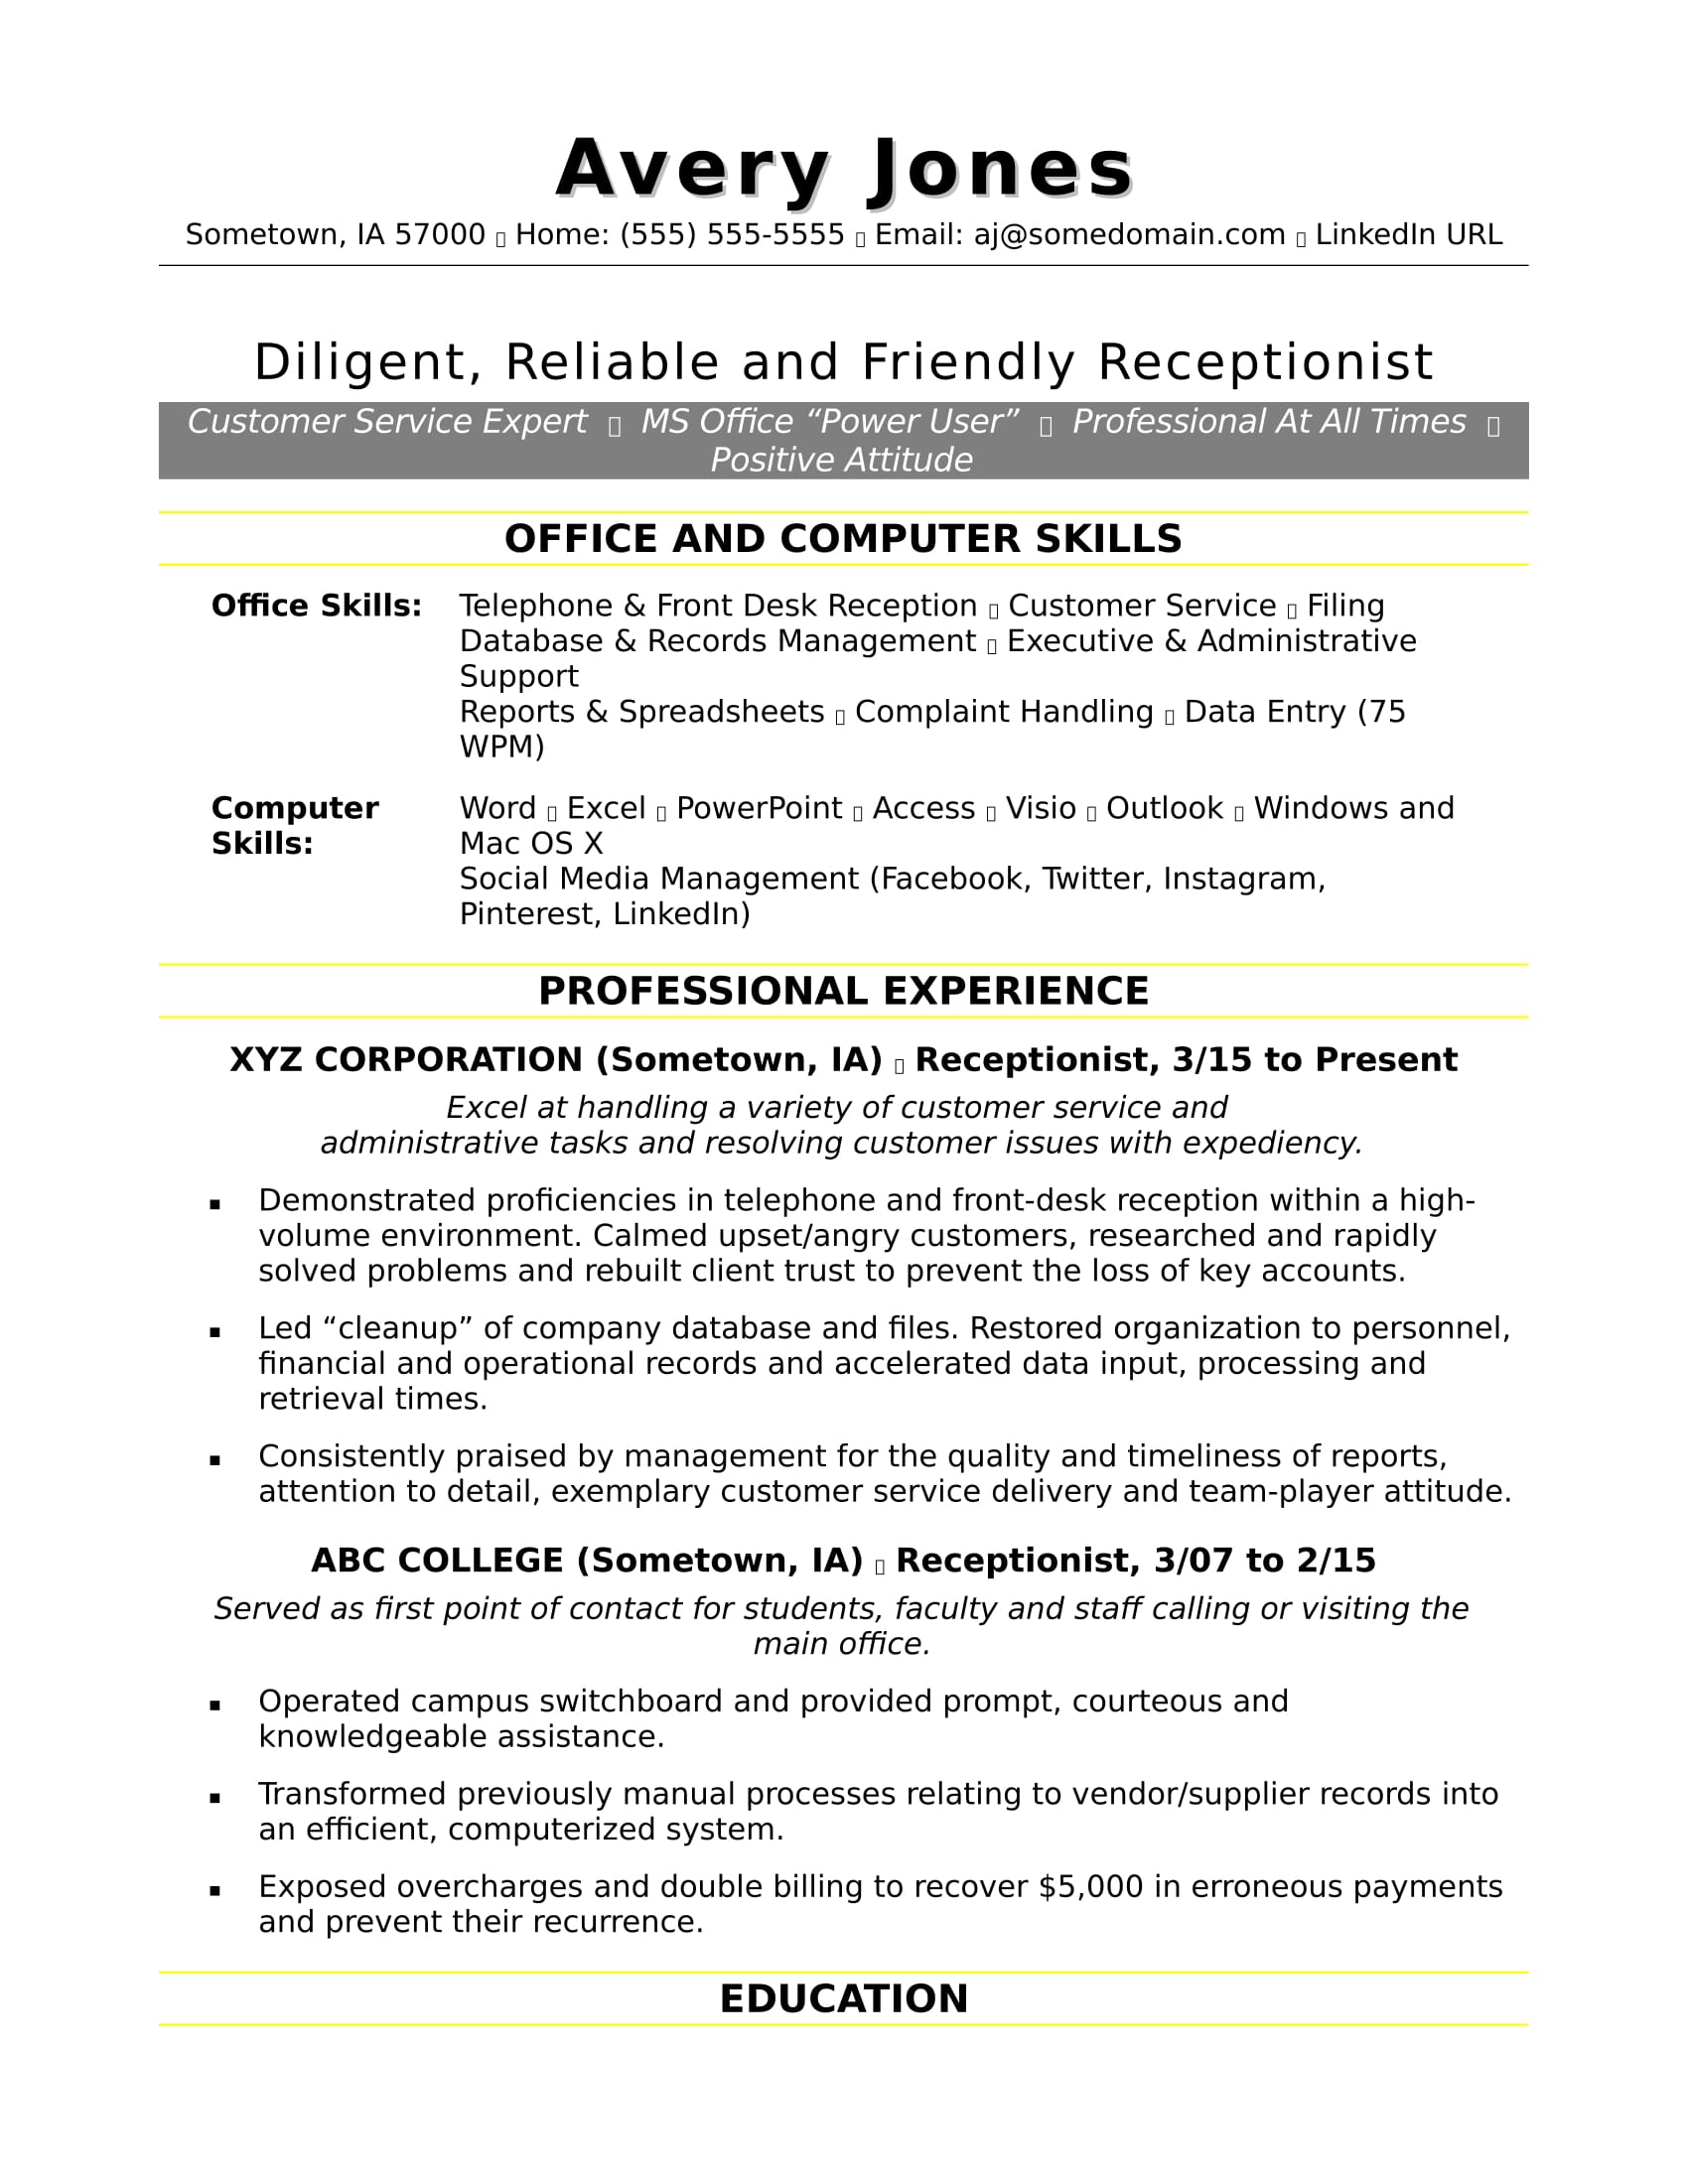 resume template for front desk position